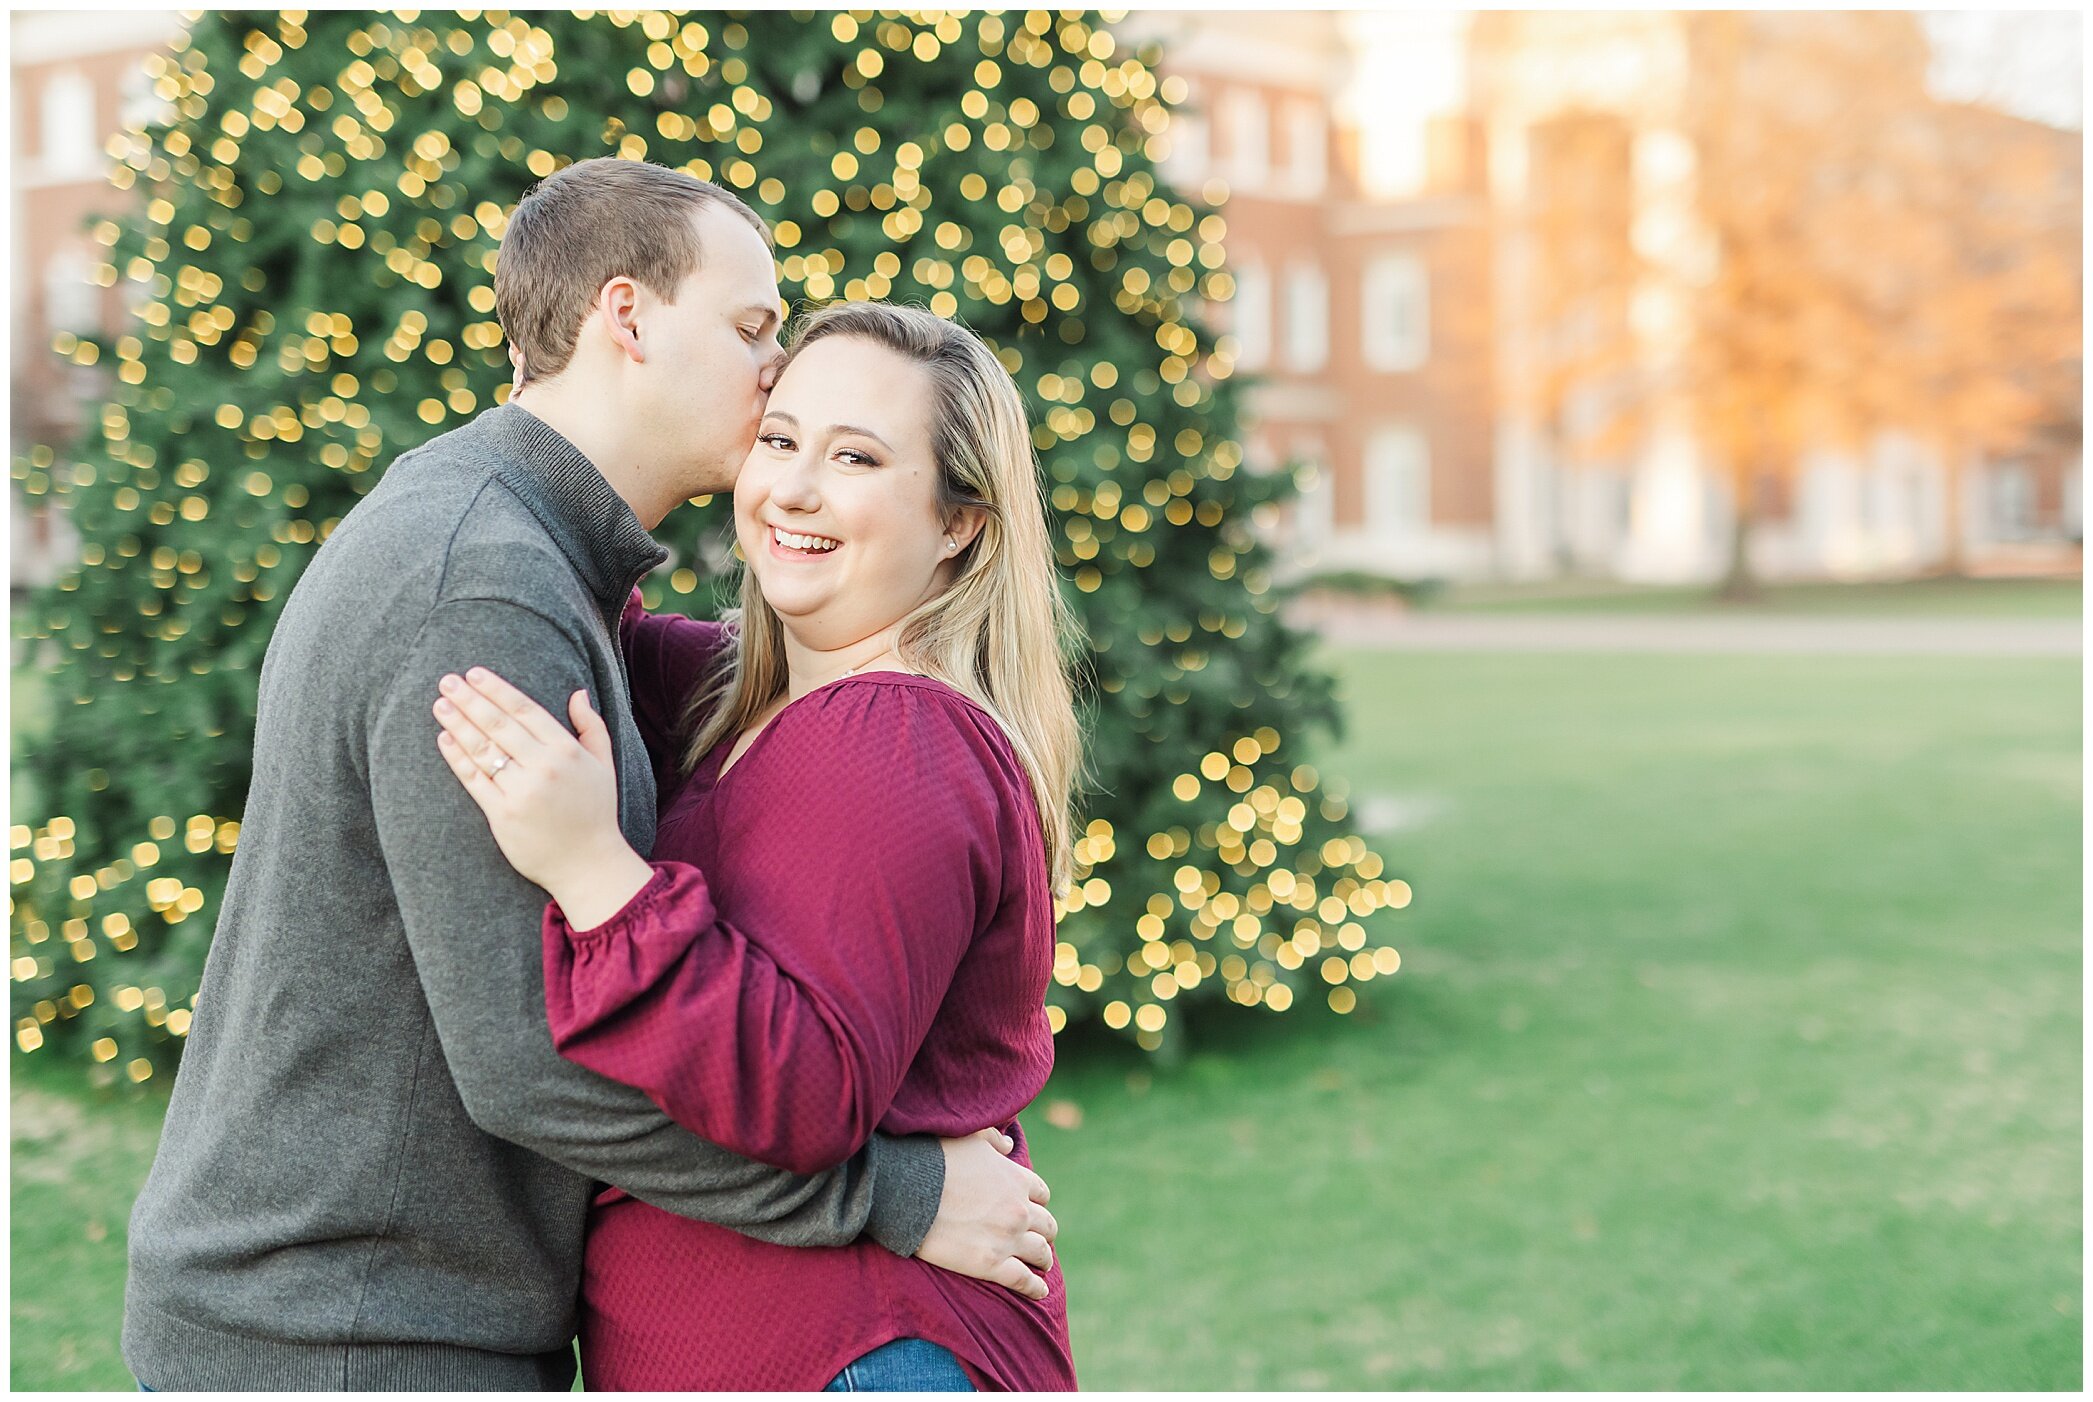 Christopher Newport University alumni pose together during engagement photos on campus